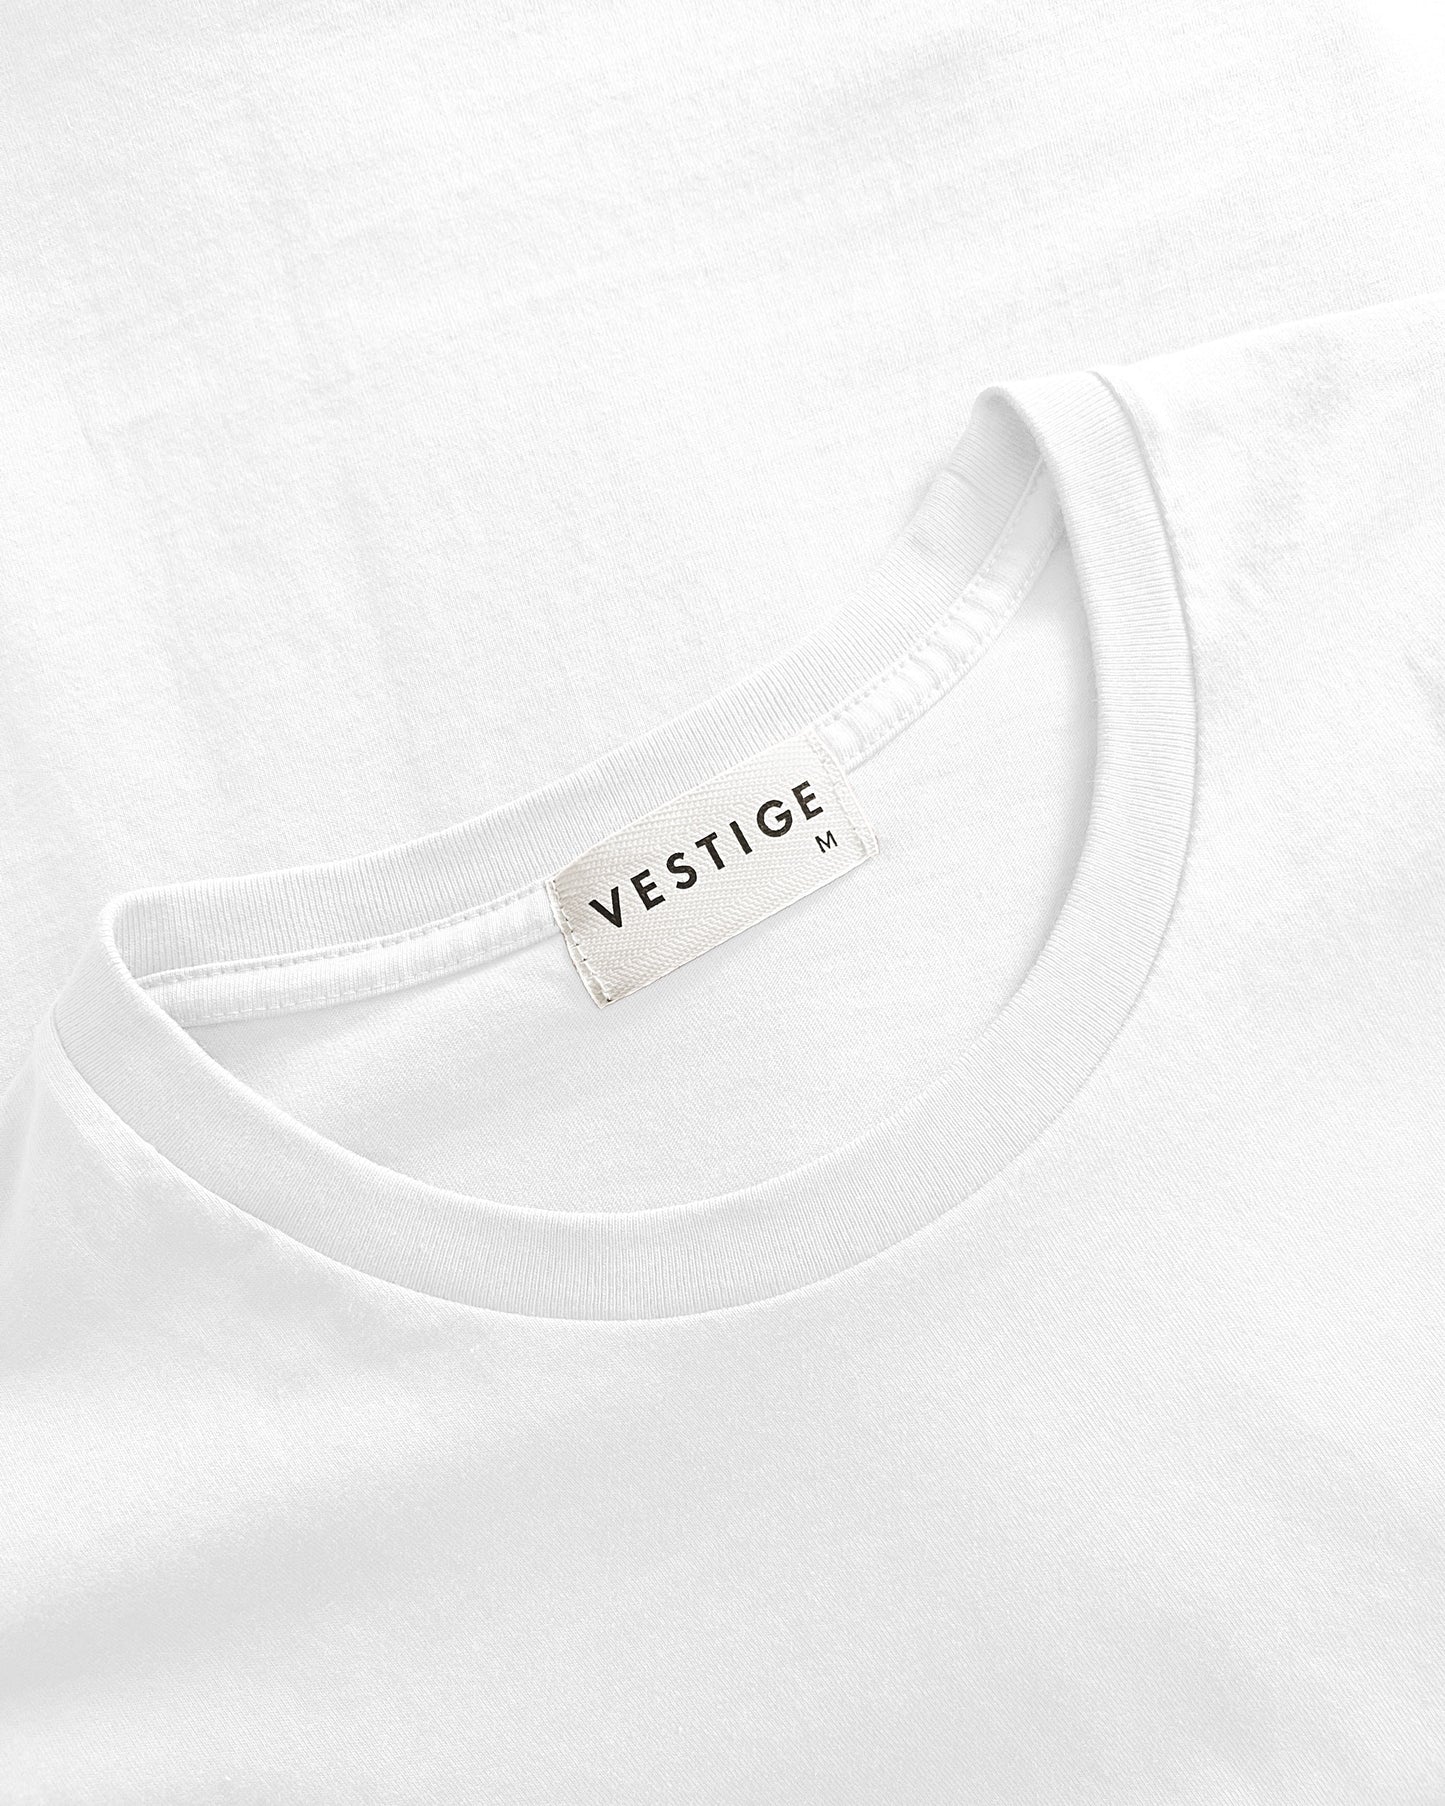 Carbon Abstraction Tee, White